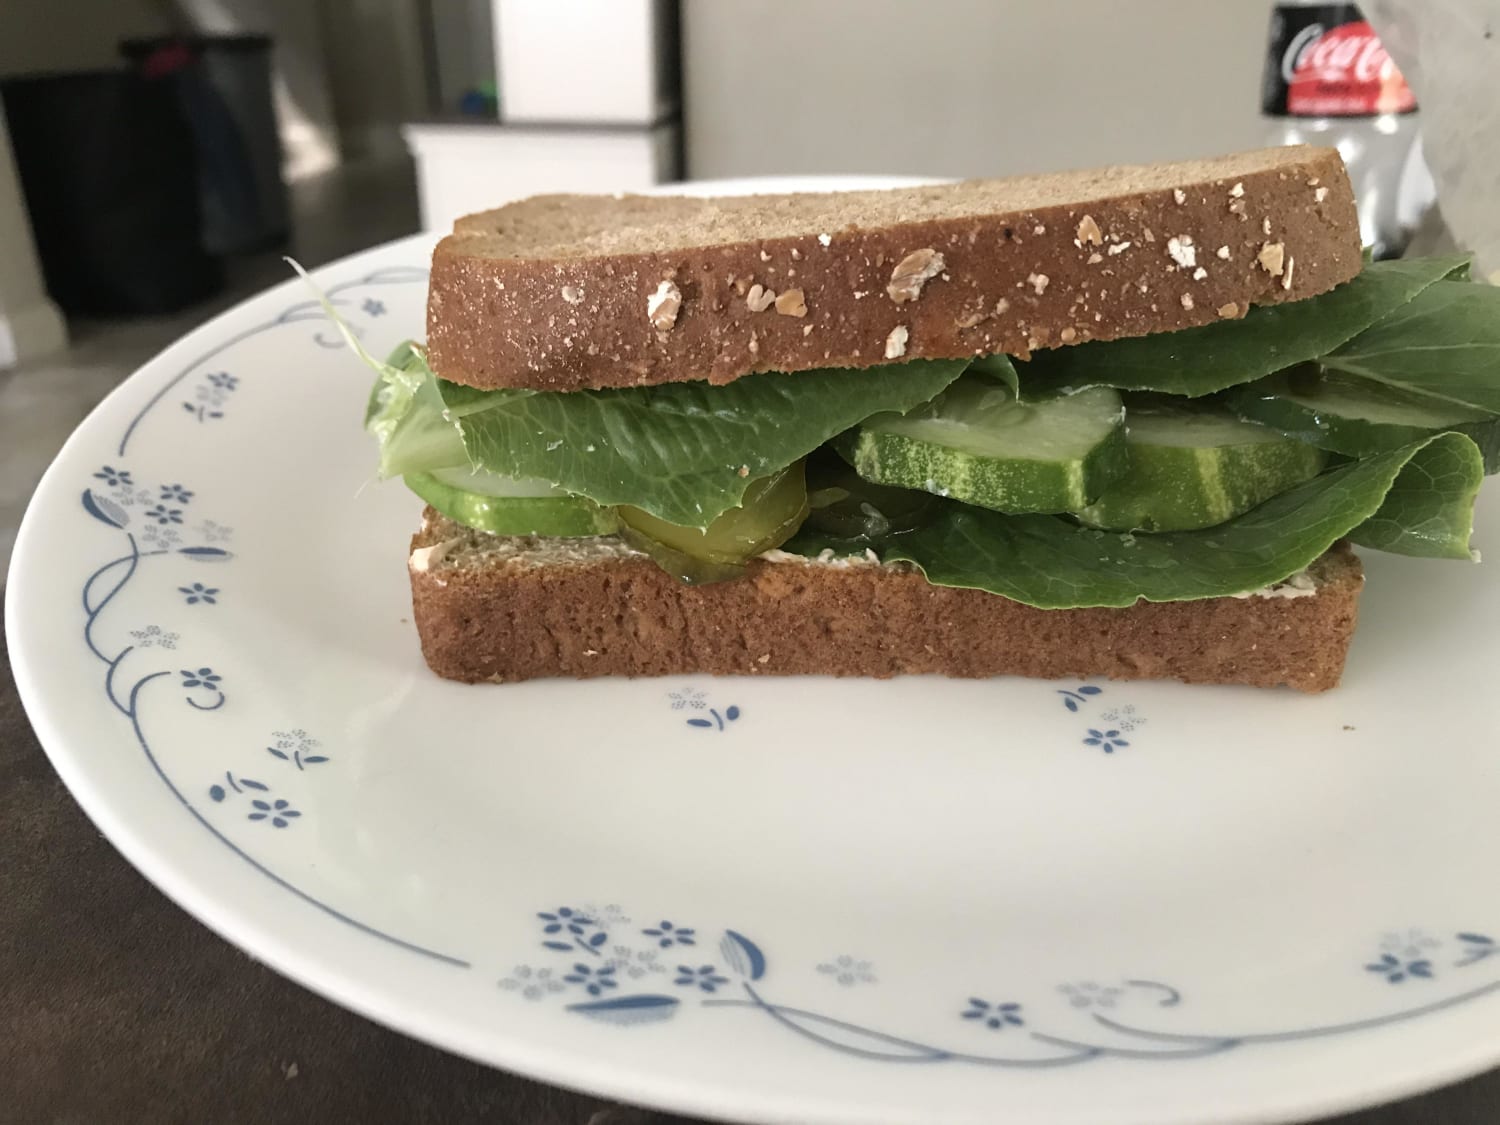 Homegrown cucumber and romaine lettuce with homemade bread and butter pickles and sriracha cream cheese spread on wheat bread. Doesn’t look like much but tis divine my friends.